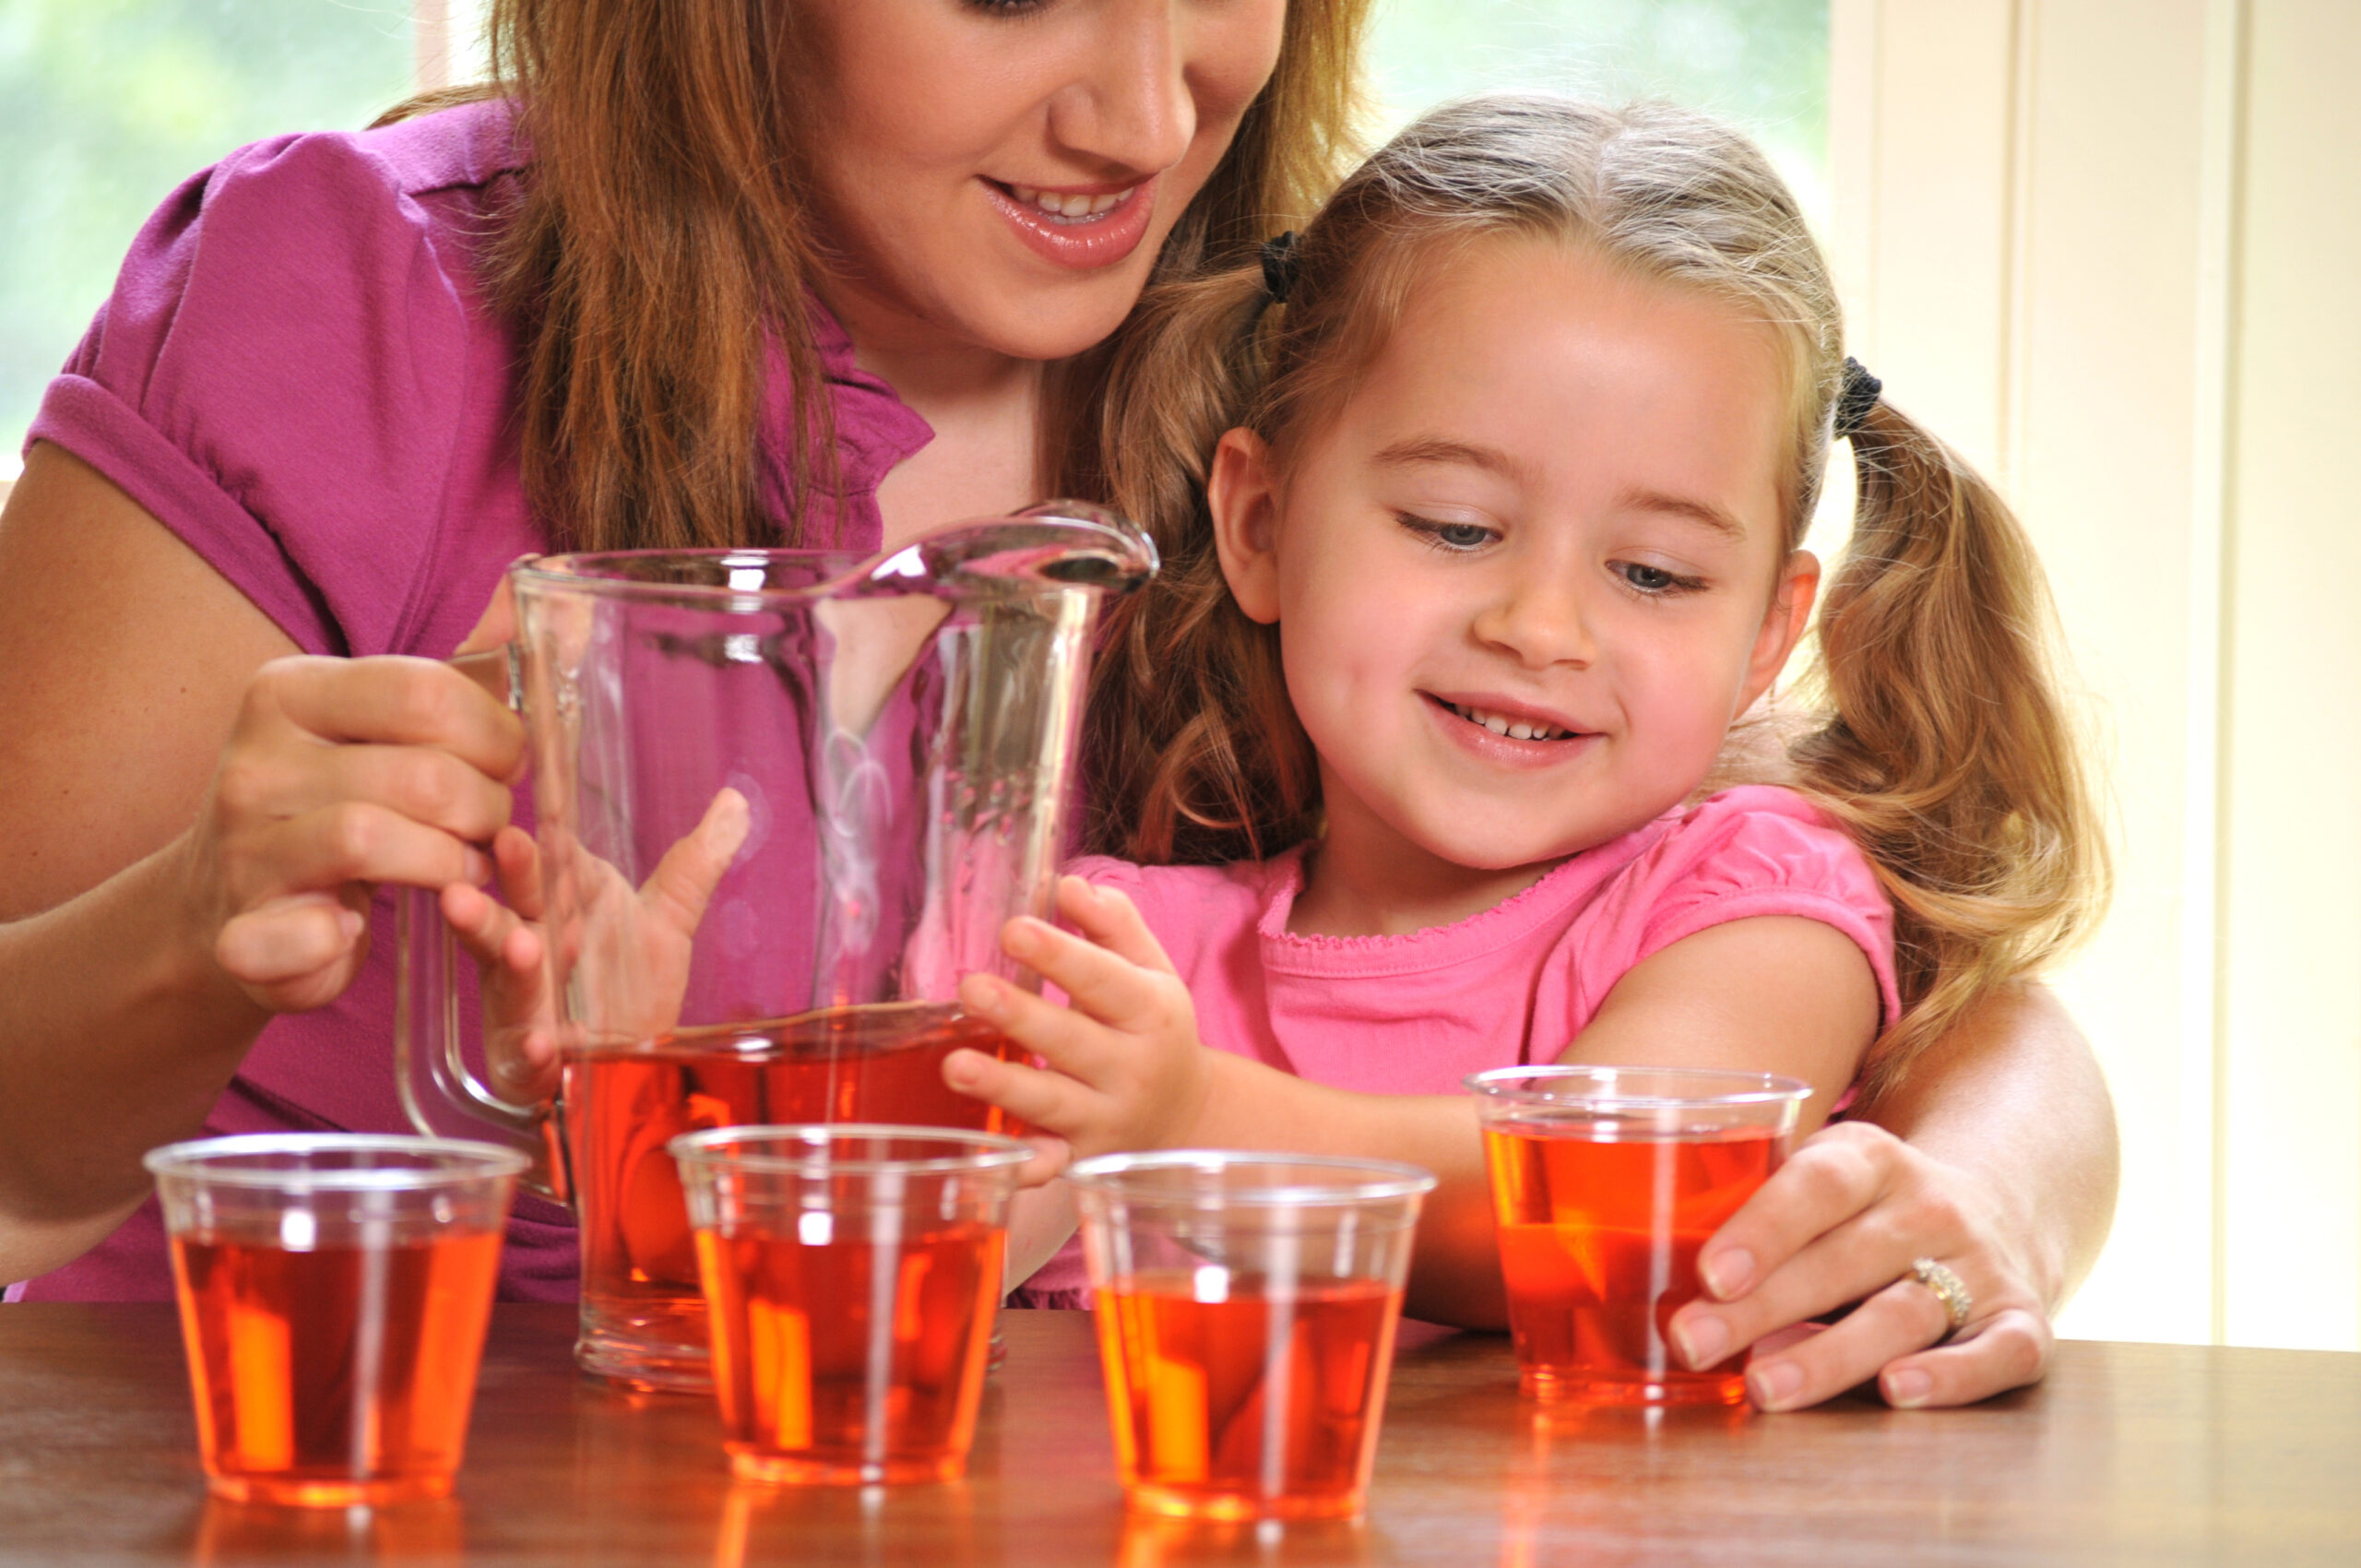 horizontal image of a young girl helping her mother with pouring drinks or juice, for a party or guests. the little girl has an enthusiastic expression. Focus in on the girl and a small amount of noise has been added to the background in post-processing.